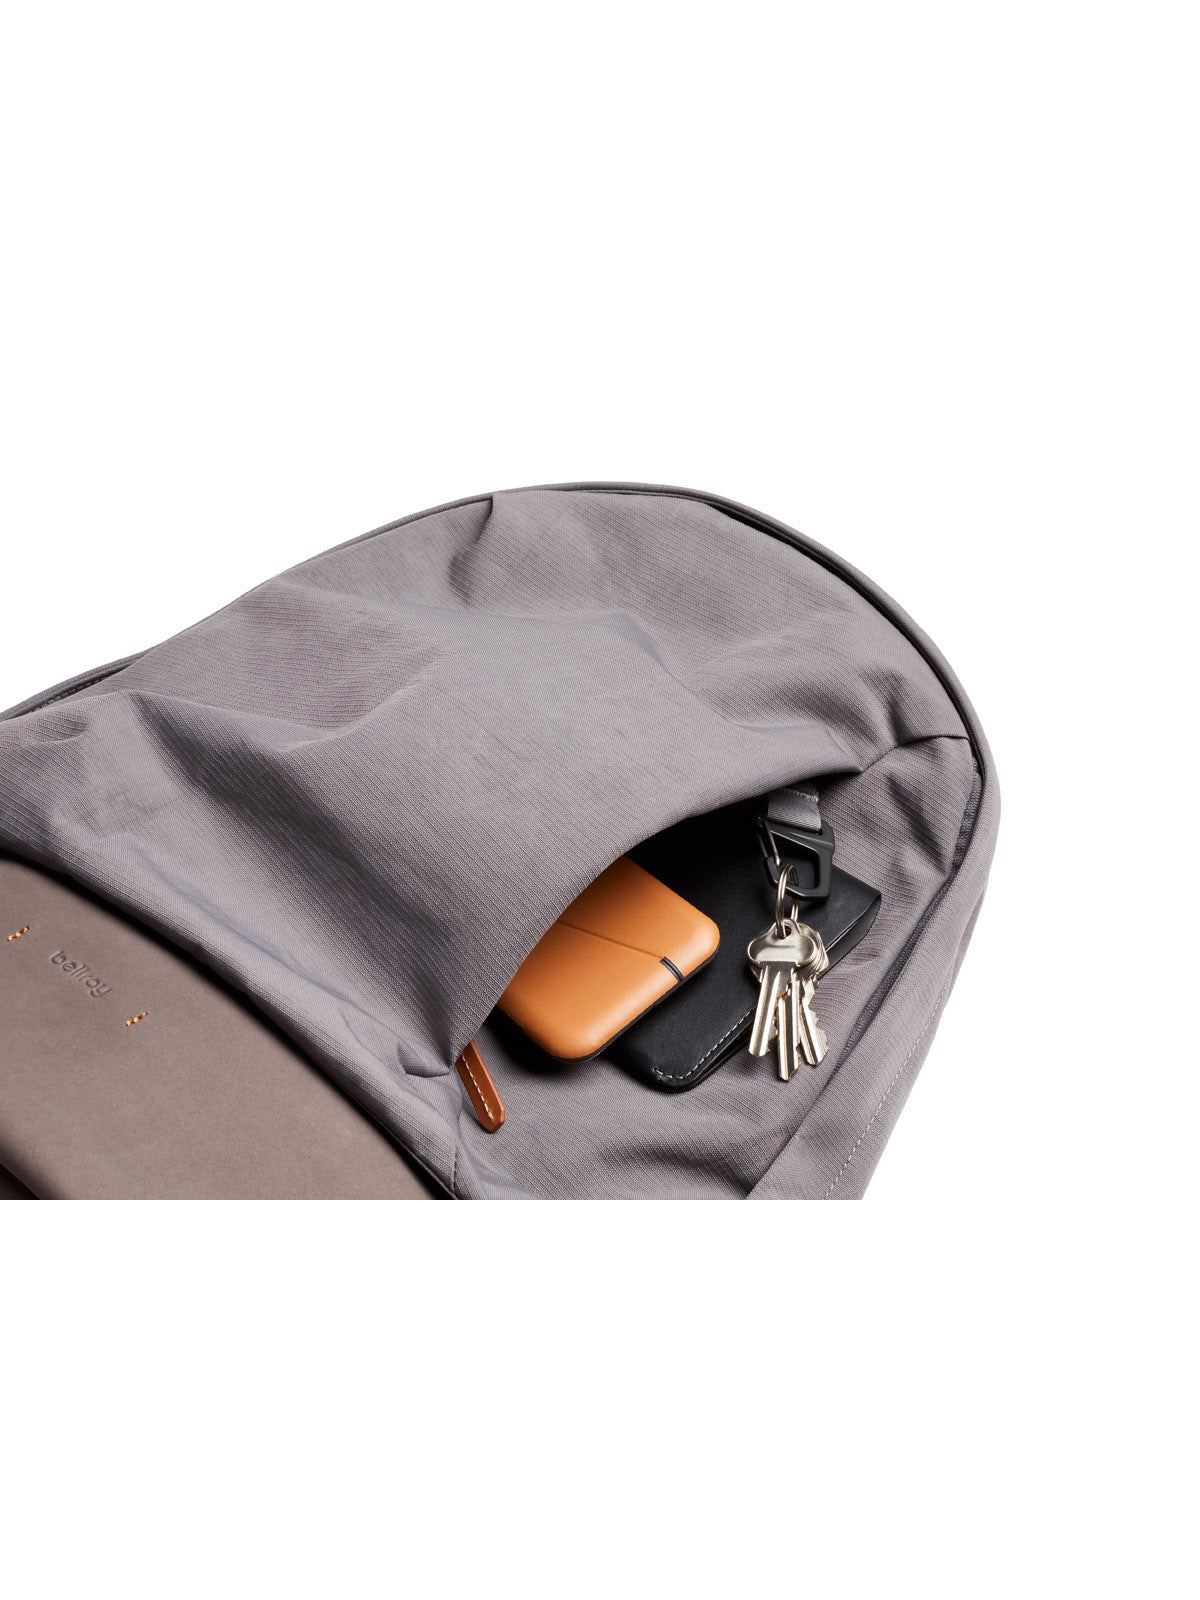 Bellroy Classic Backpack Premium Edition Storm Grey